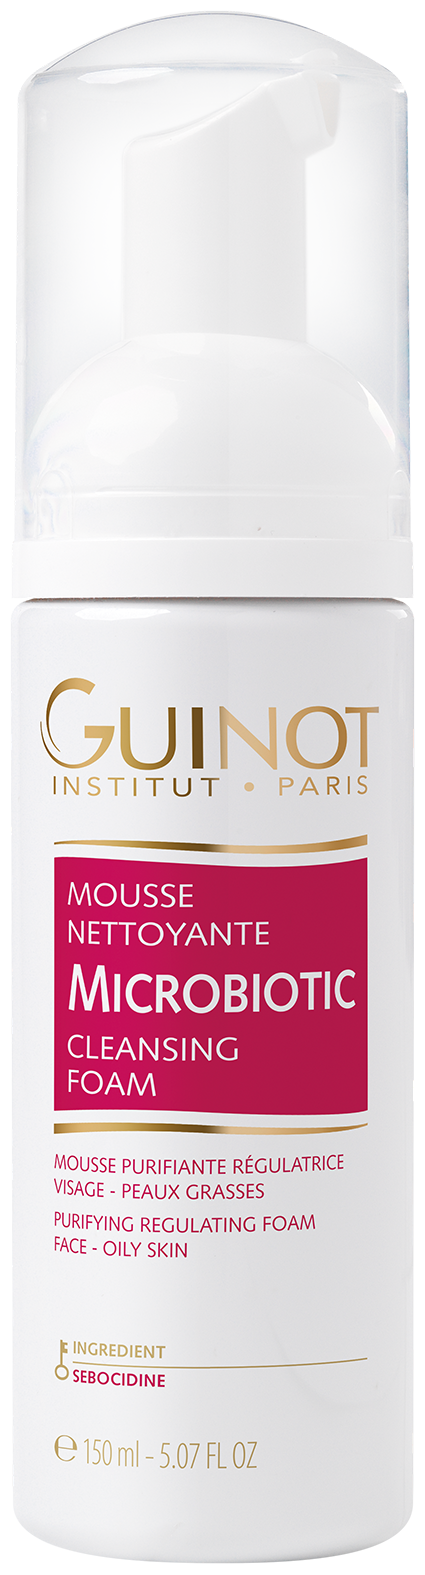 Mousse Nettouante Microbiotic 150ml